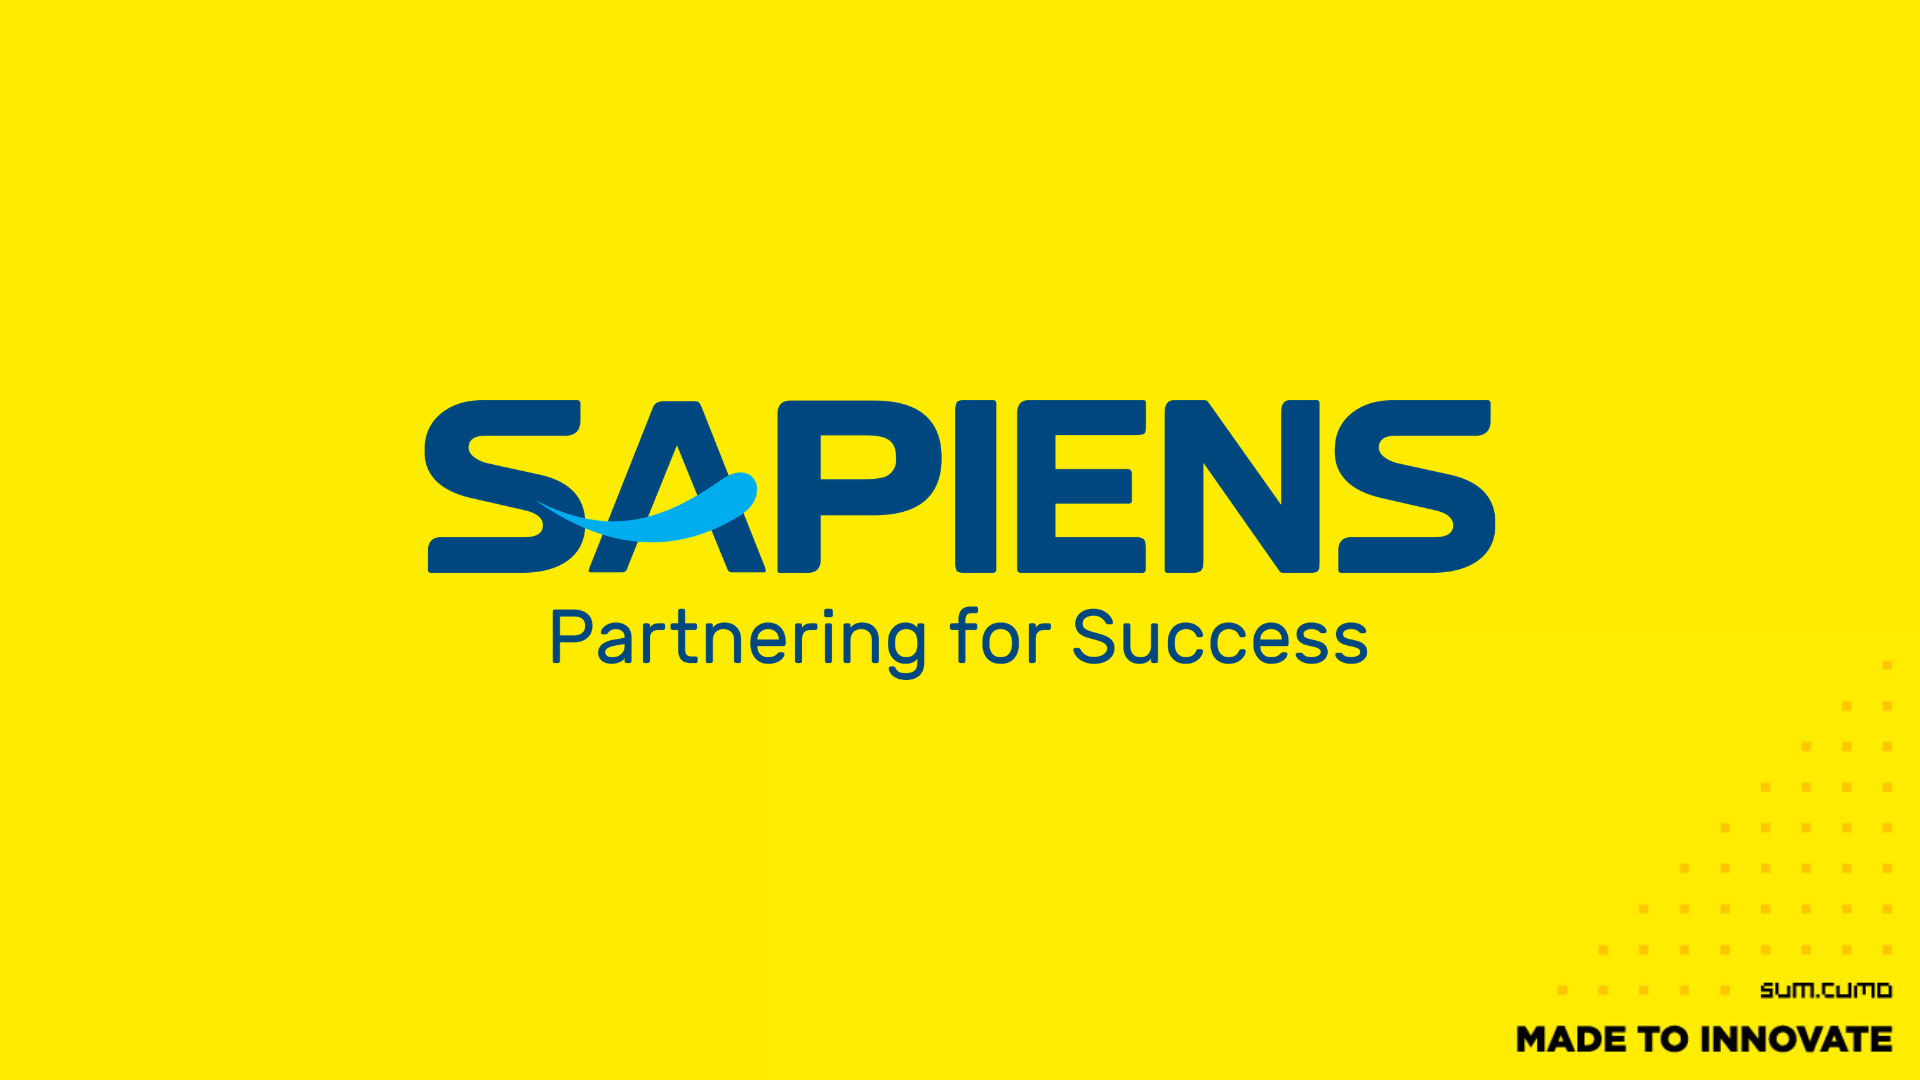 Sapiens pushes into the German market and sees DACH market as one of the most important target markets